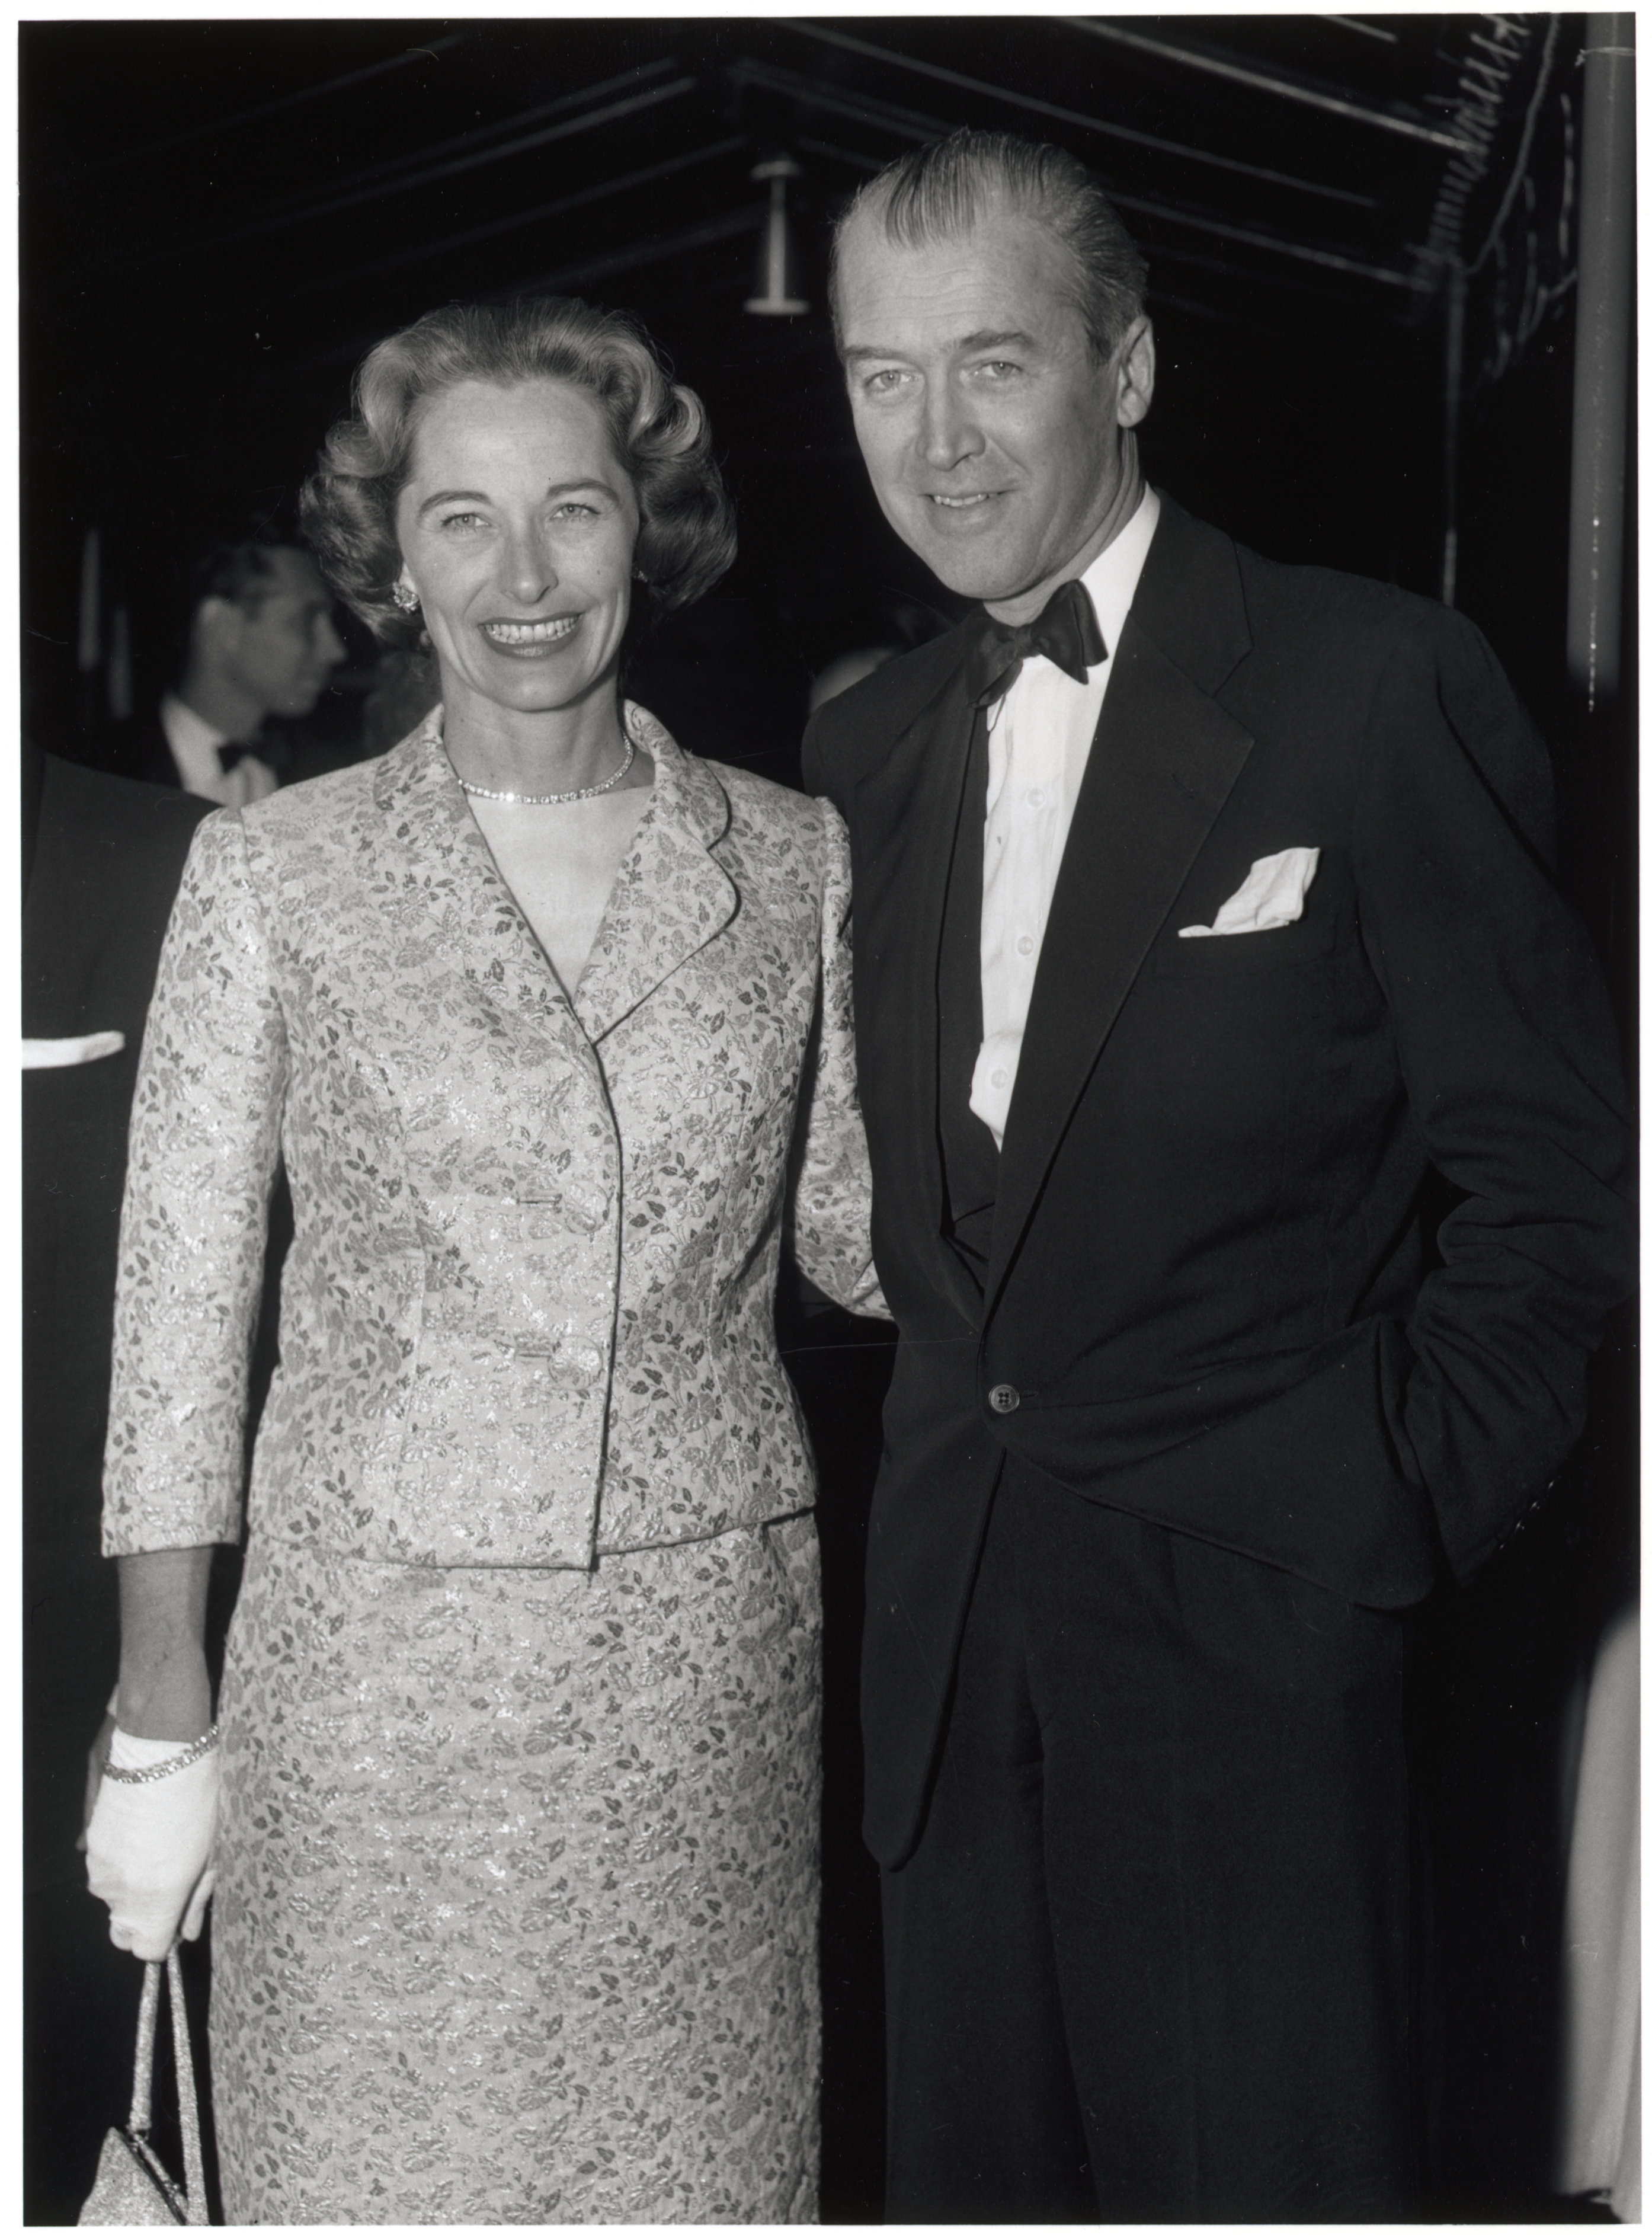 Gloria Hatrick McLean and James Stewart in New York City on May 30, 2013 | Source: Getty Images